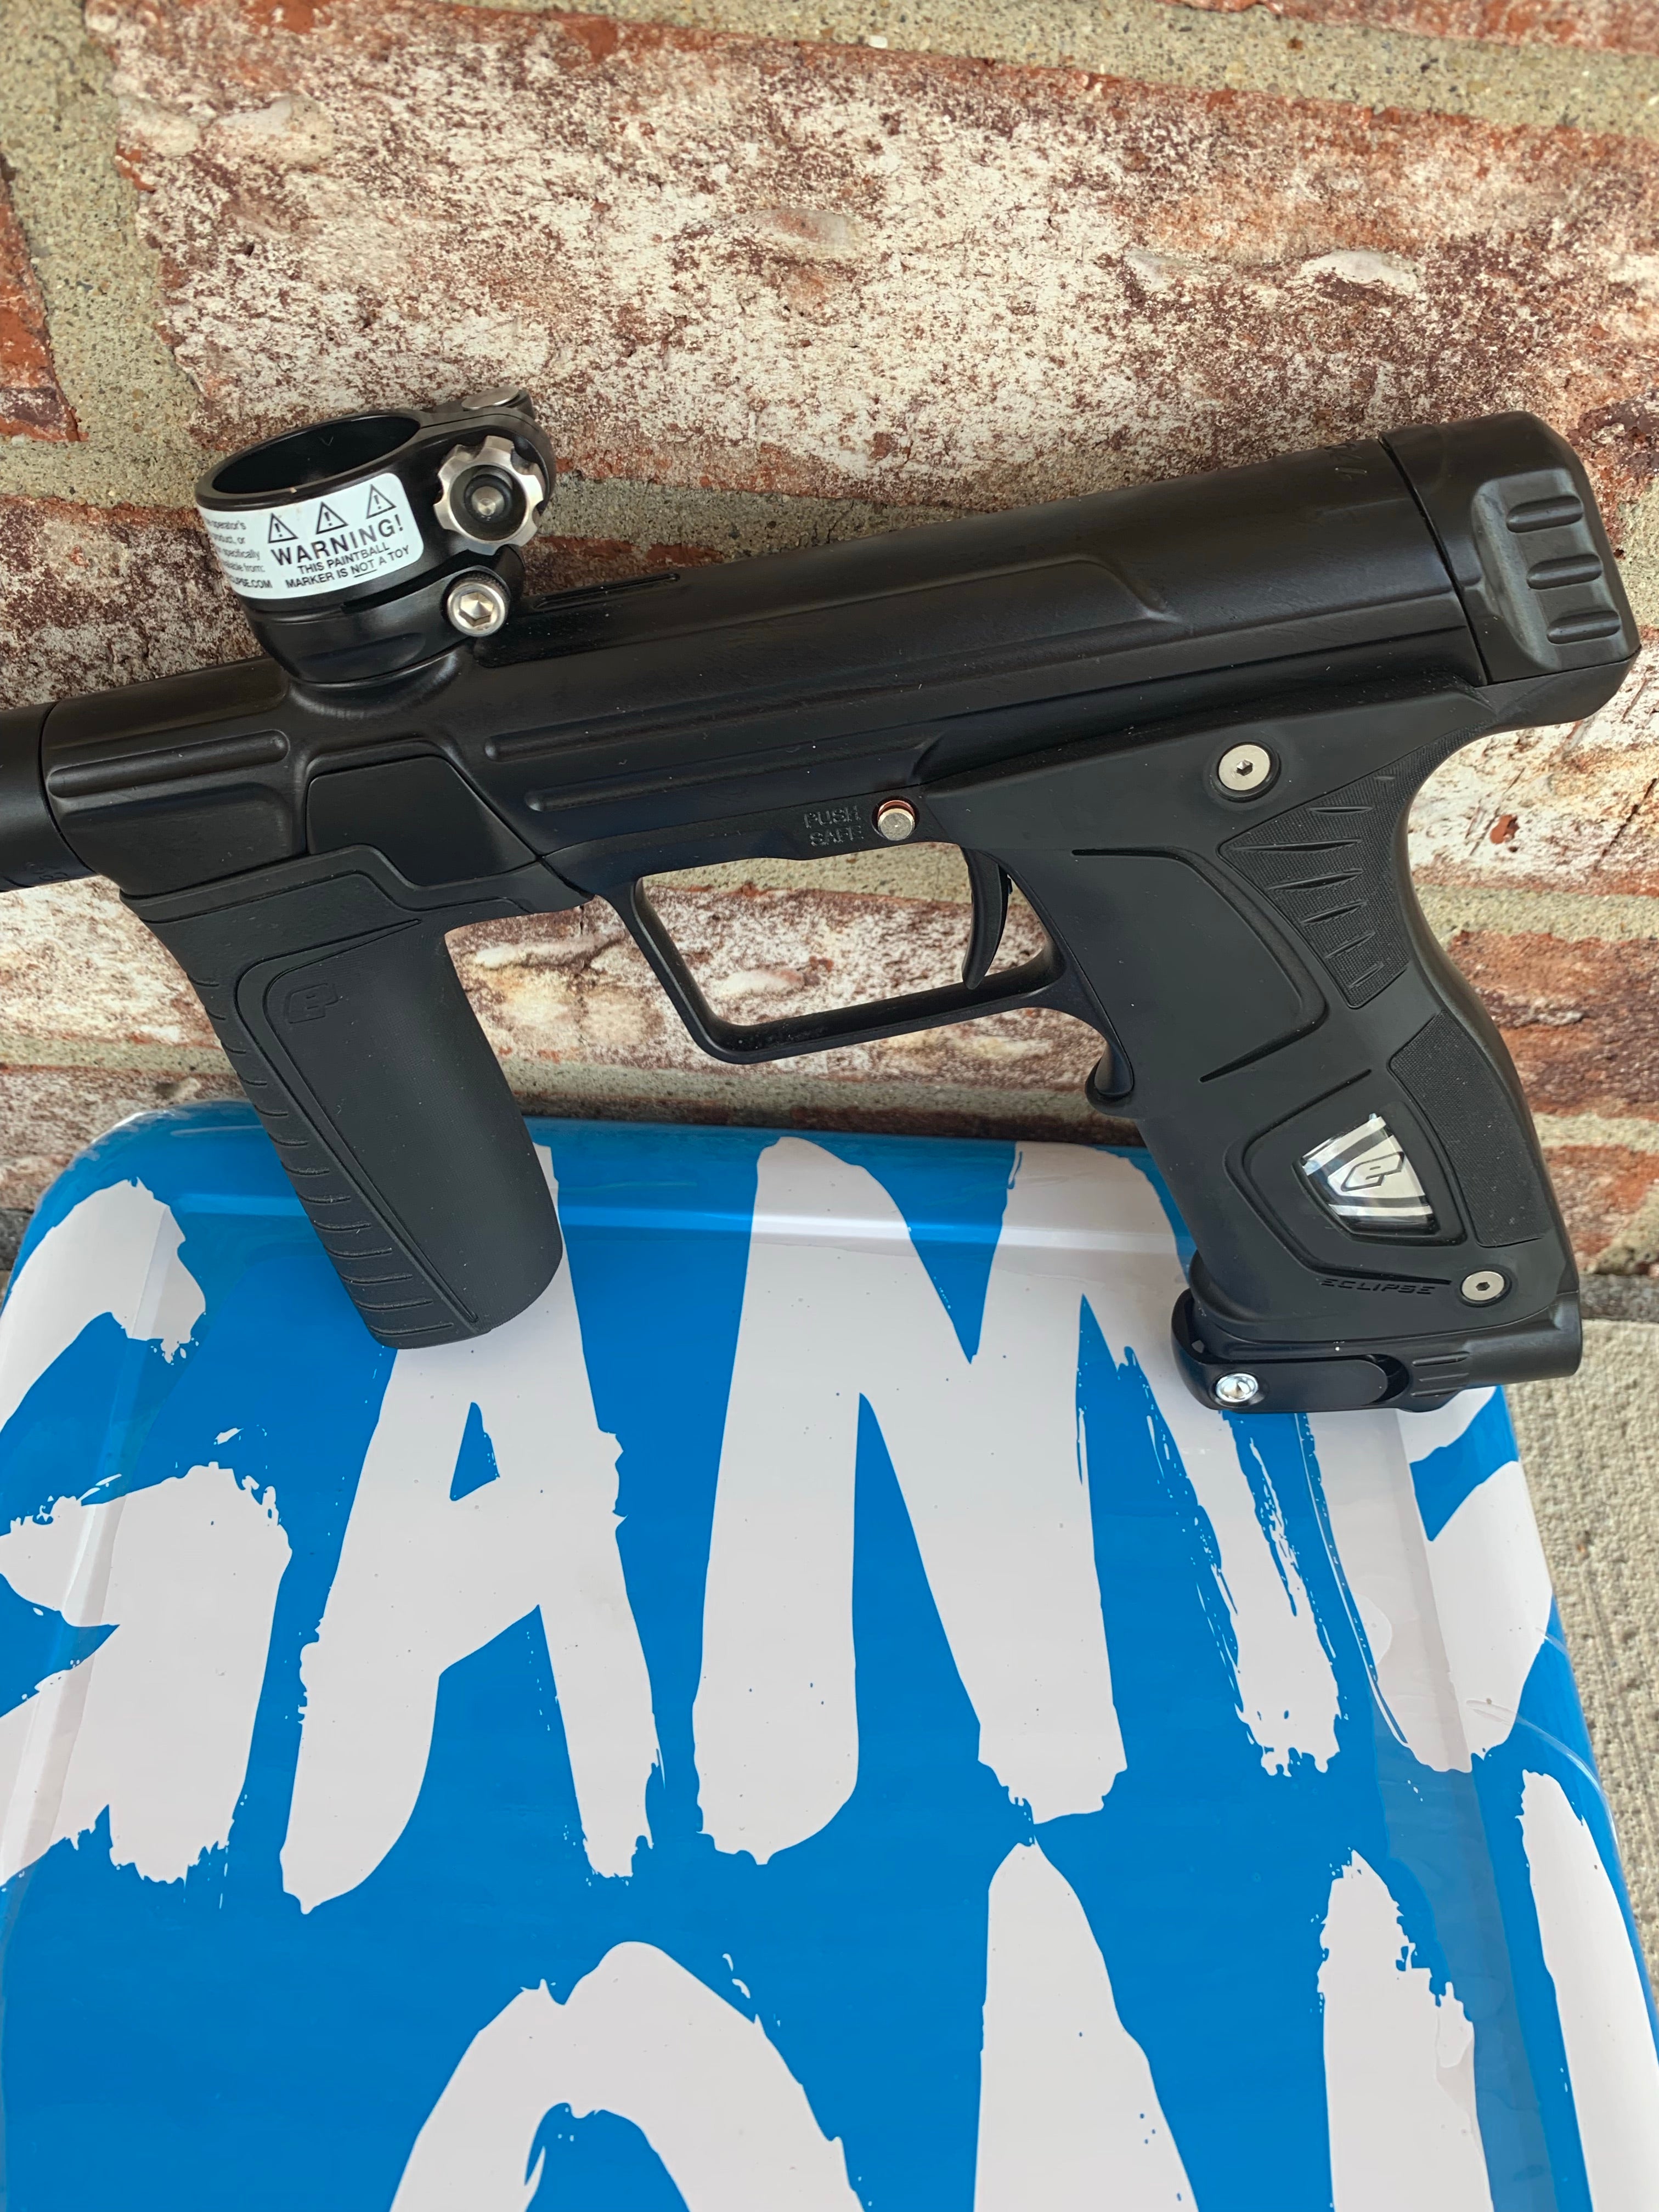 Used Planet Eclipse M170r Paintball Marker- Black